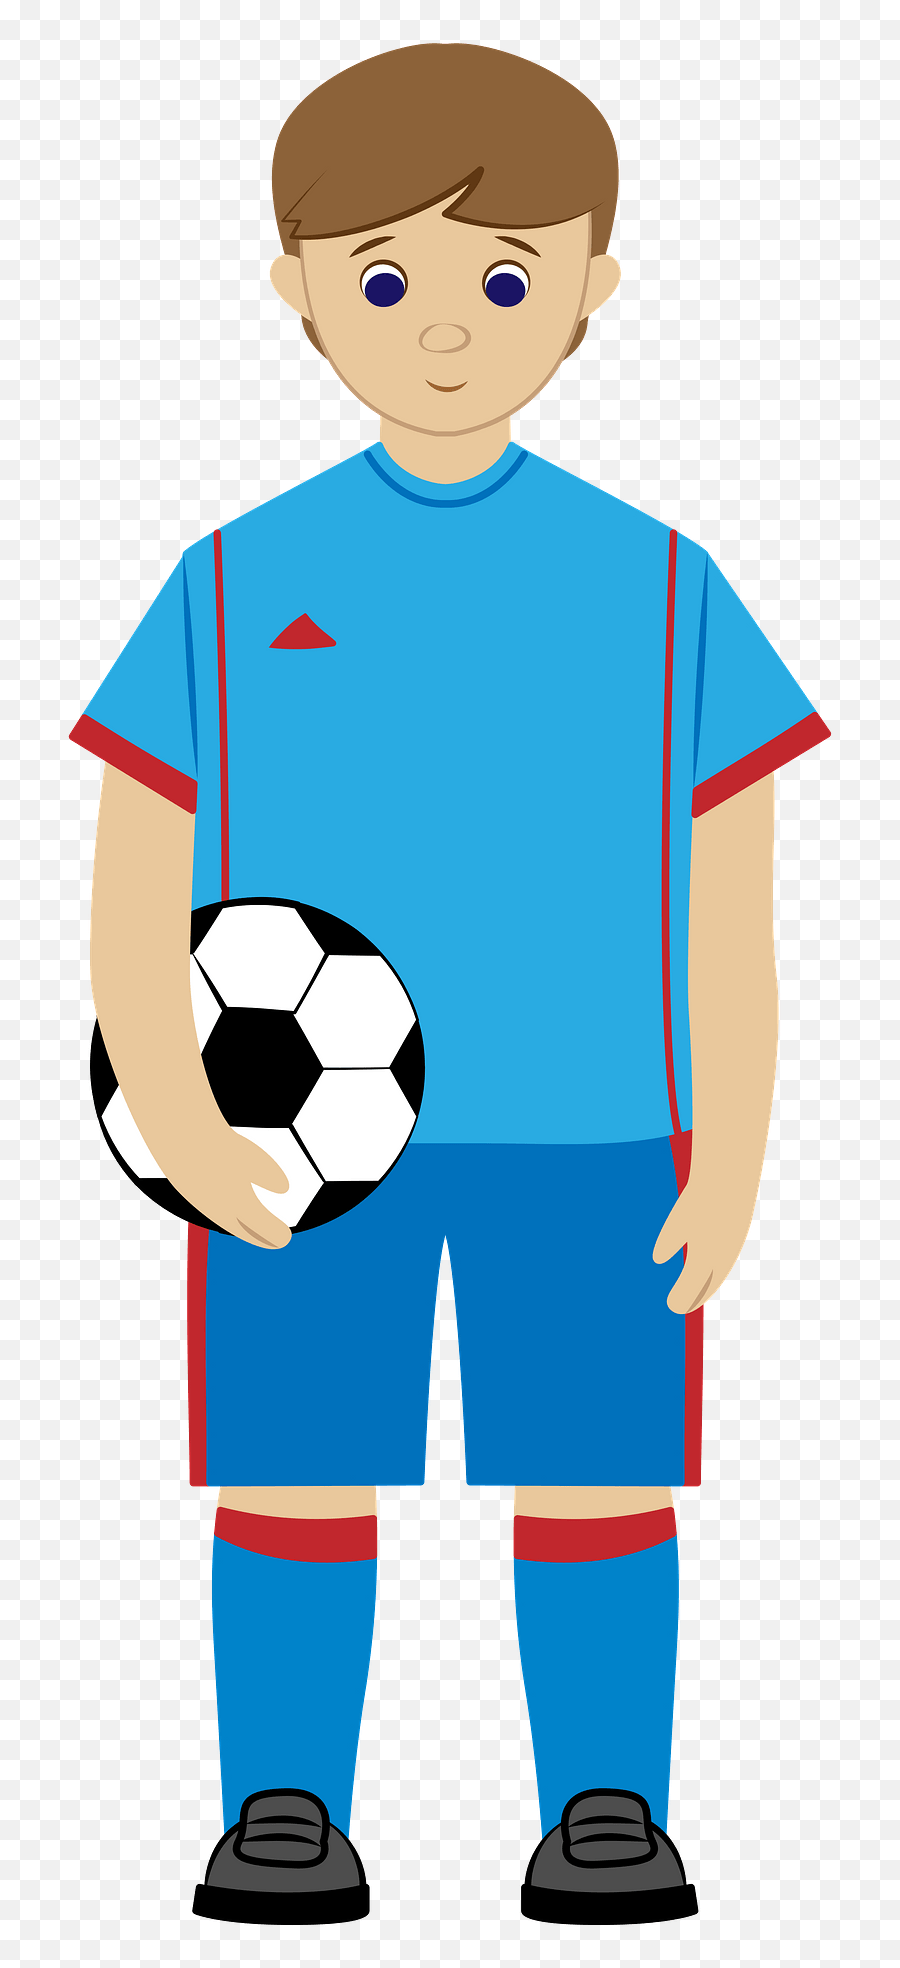 Soccer Player Clipart Free Download Transparent Png - For Soccer Emoji,Football Player Clipart